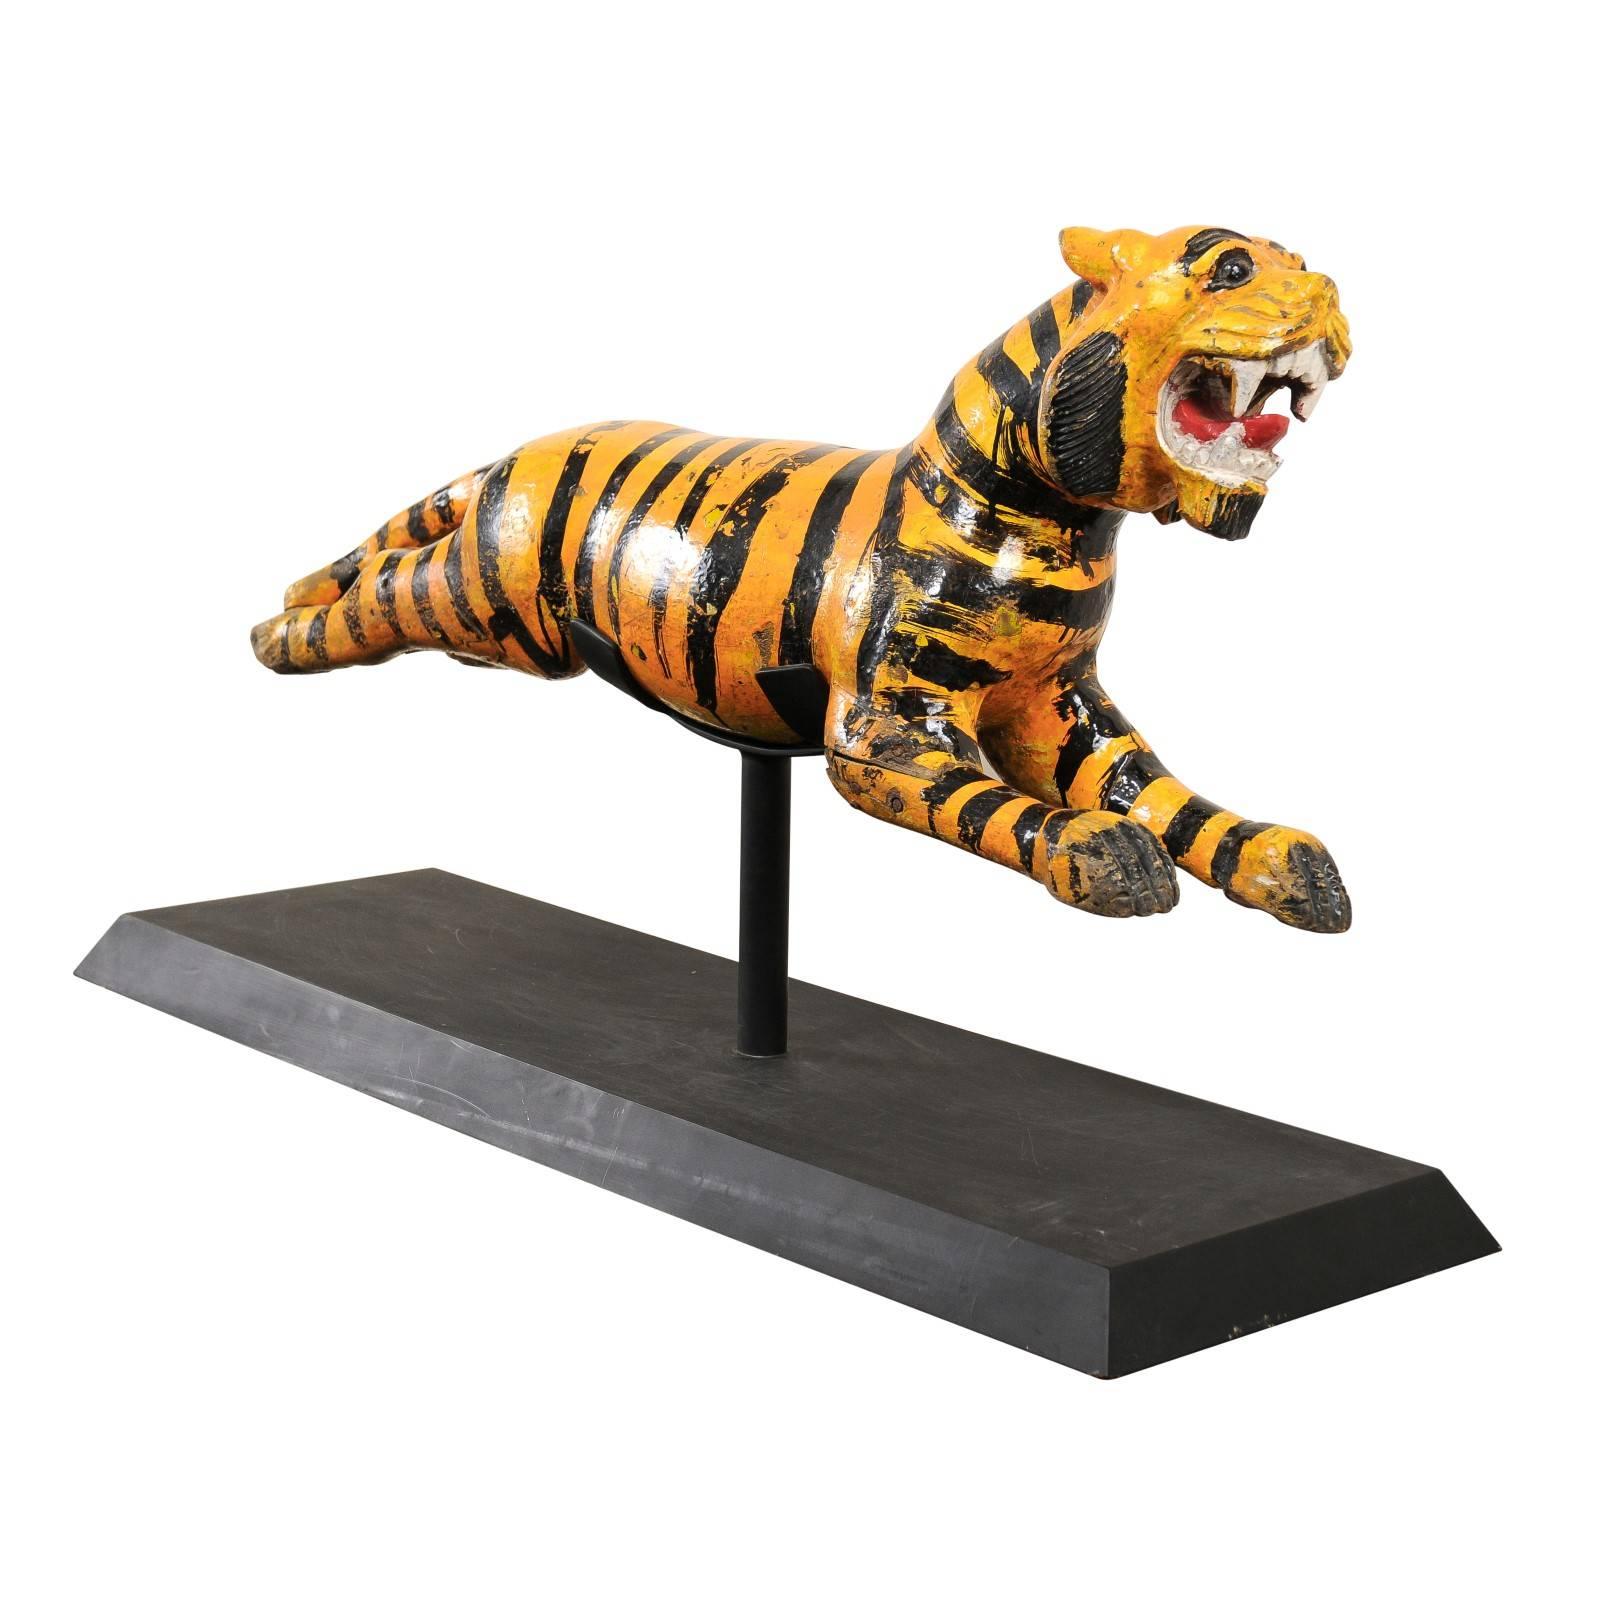 A Whimsical Merry-go-round Tiger of Carved-Wood with Orange and Black Stripes